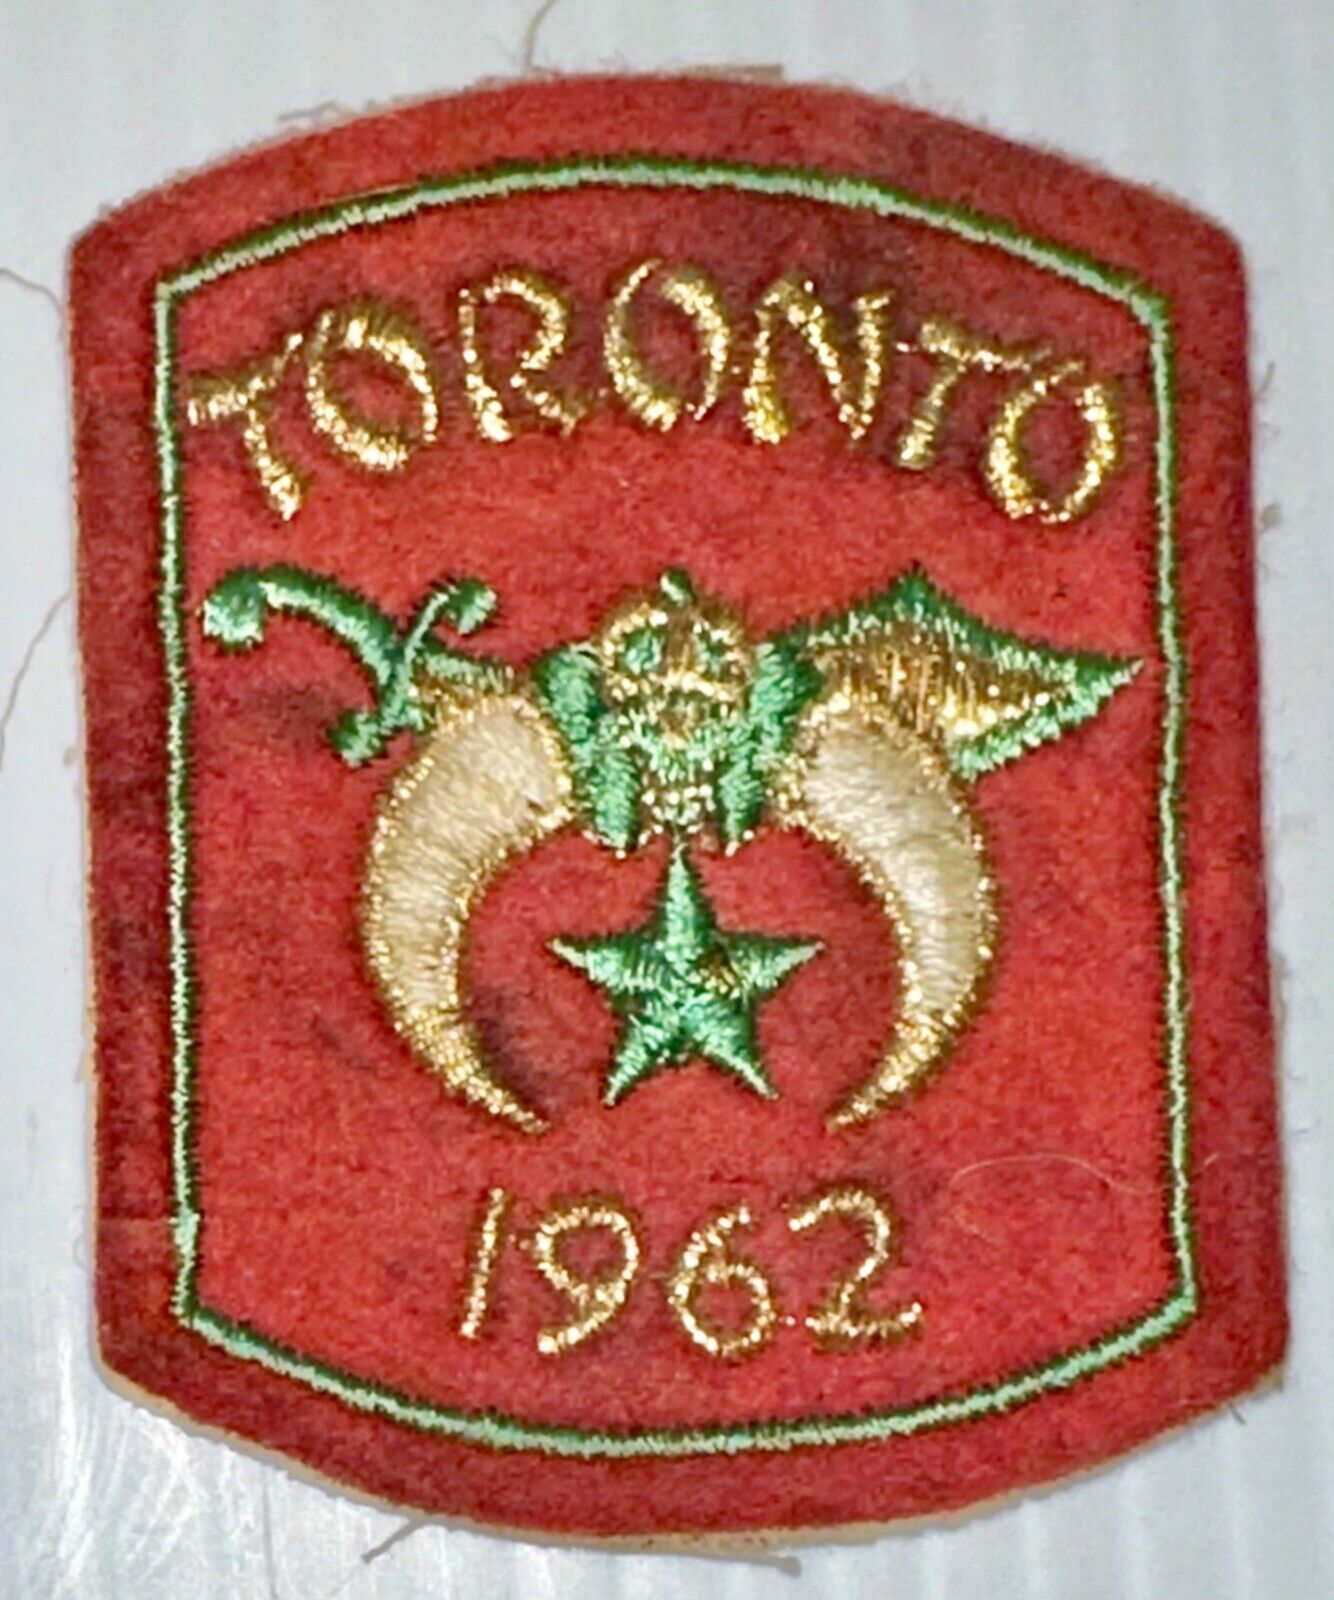 1962 Toronto Shriners Patch Ancient Arabic Order of the Nobles Antique Official